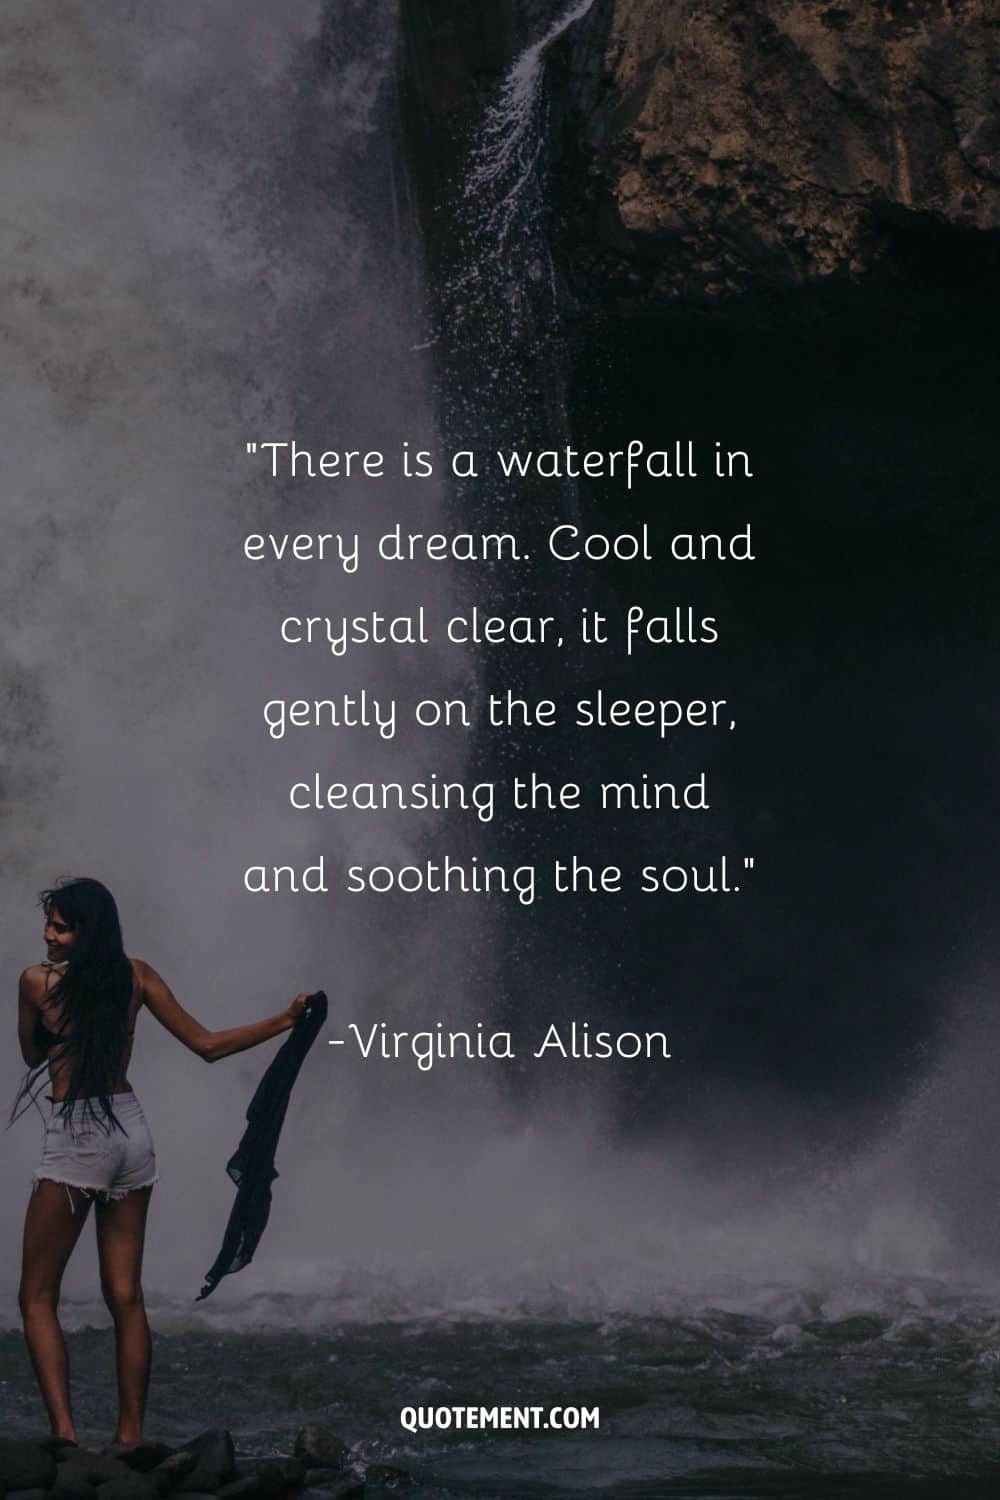 Deep quote on waterfalls and a woman by the waterfall in the background
